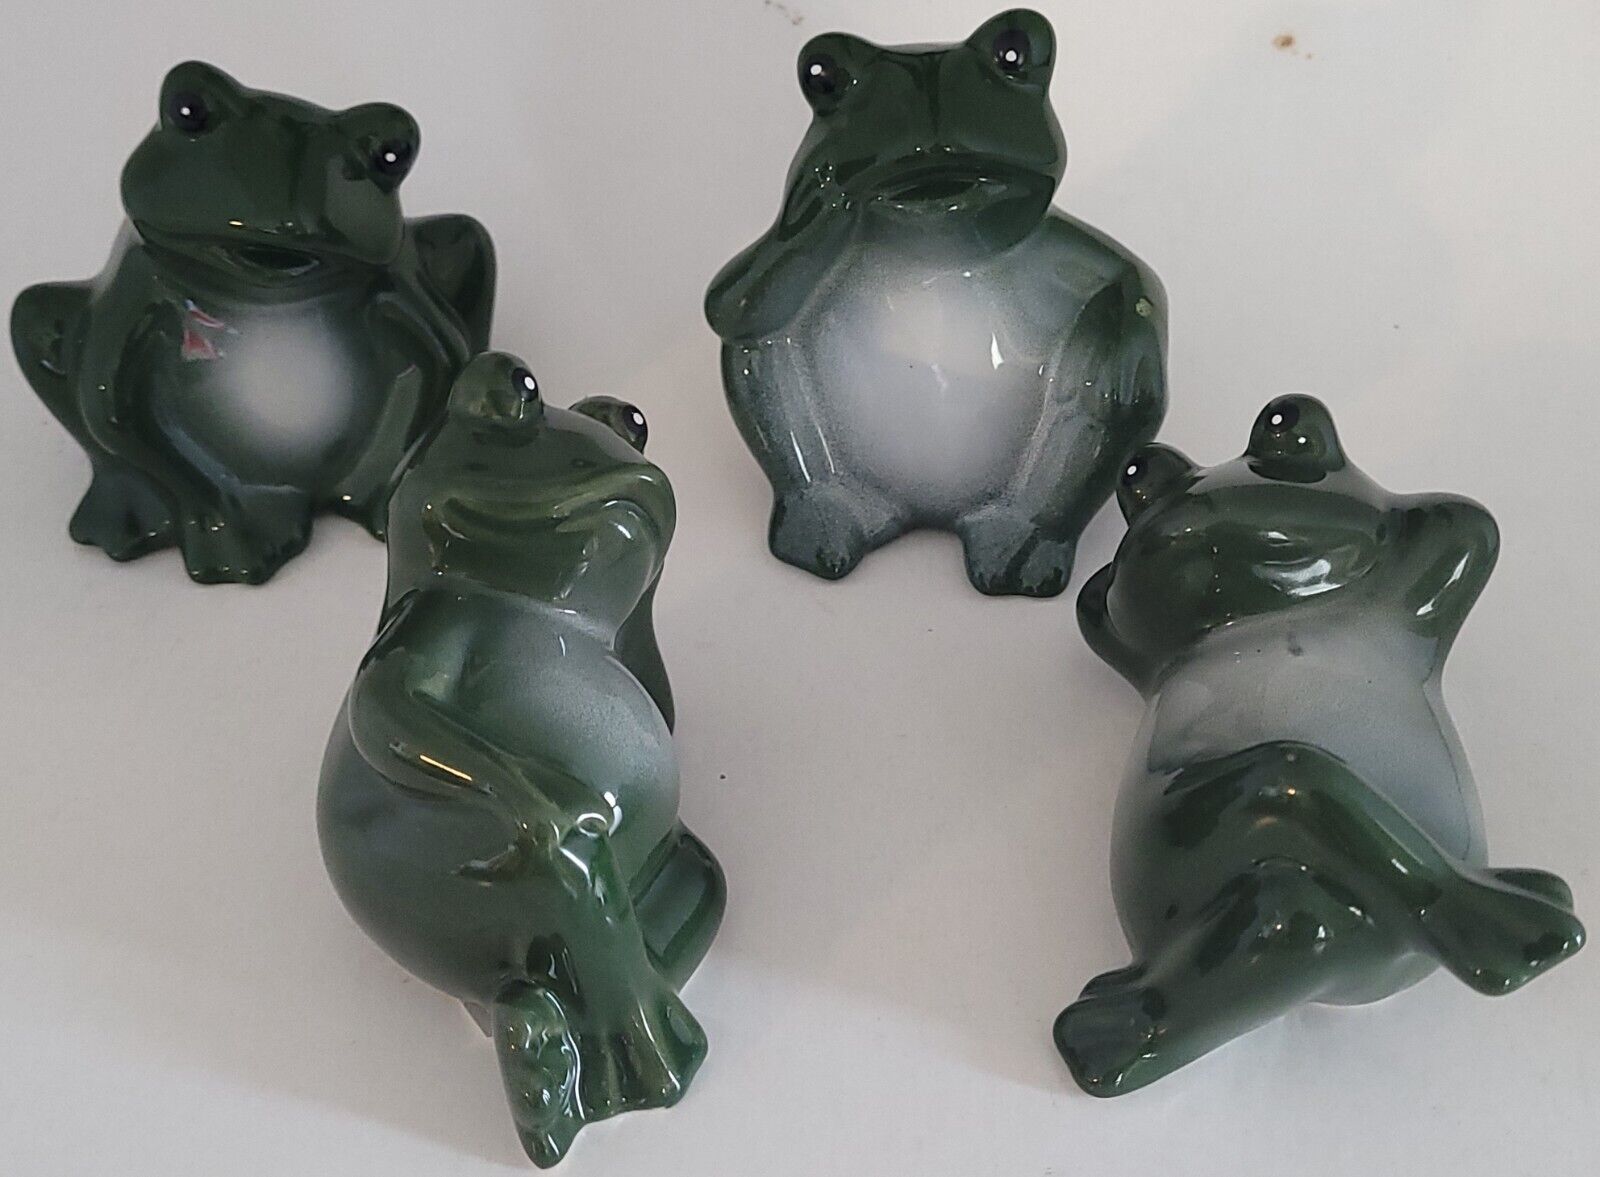 Primary image for Ceramic Frogs Garden Decorations about 4” x 3” x 3”, S24, Select: Type